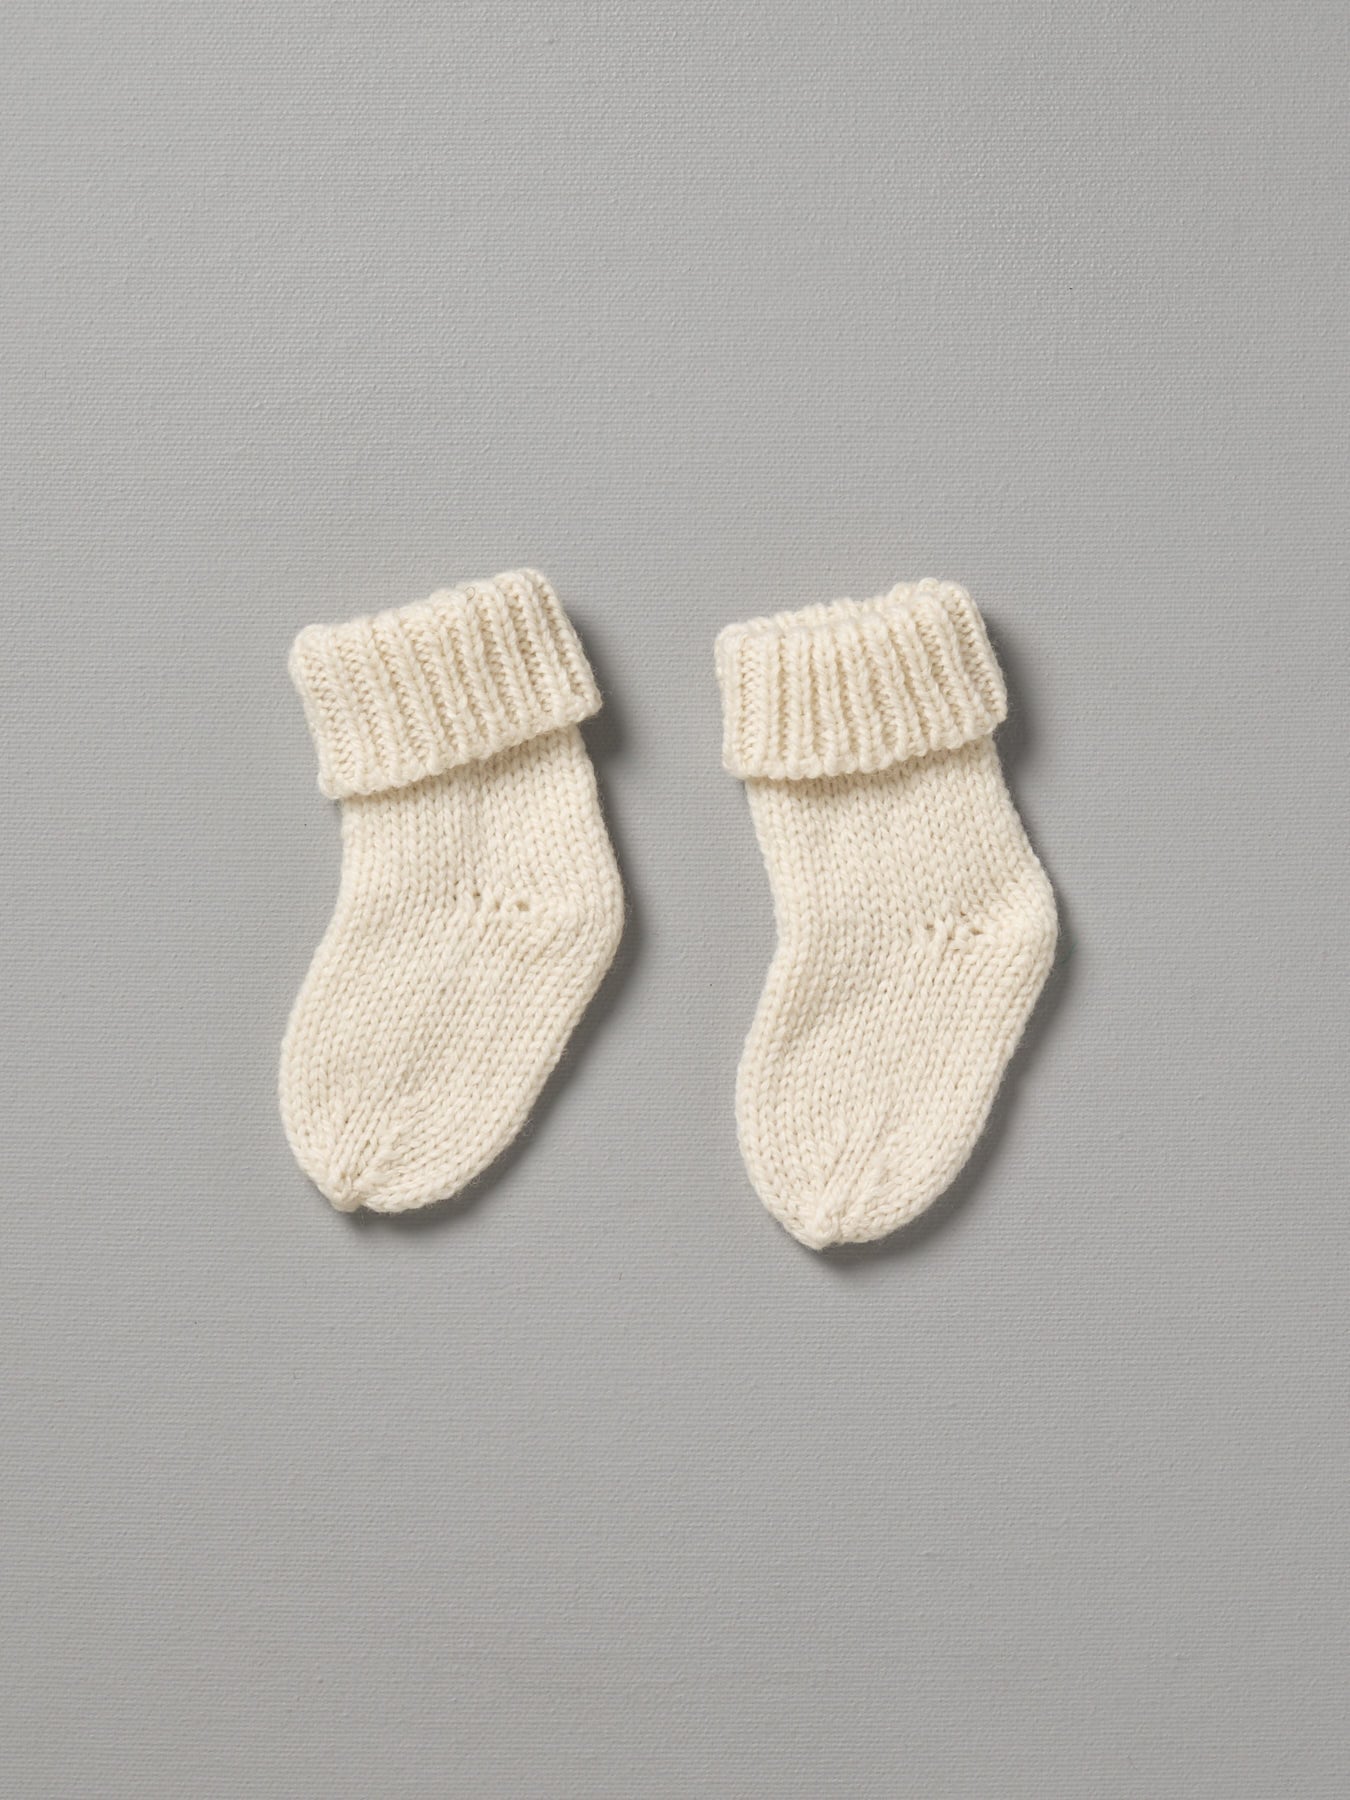 A pair of Weebits Hand Knitted 4ply Merino Socks in Ivory on a grey background.